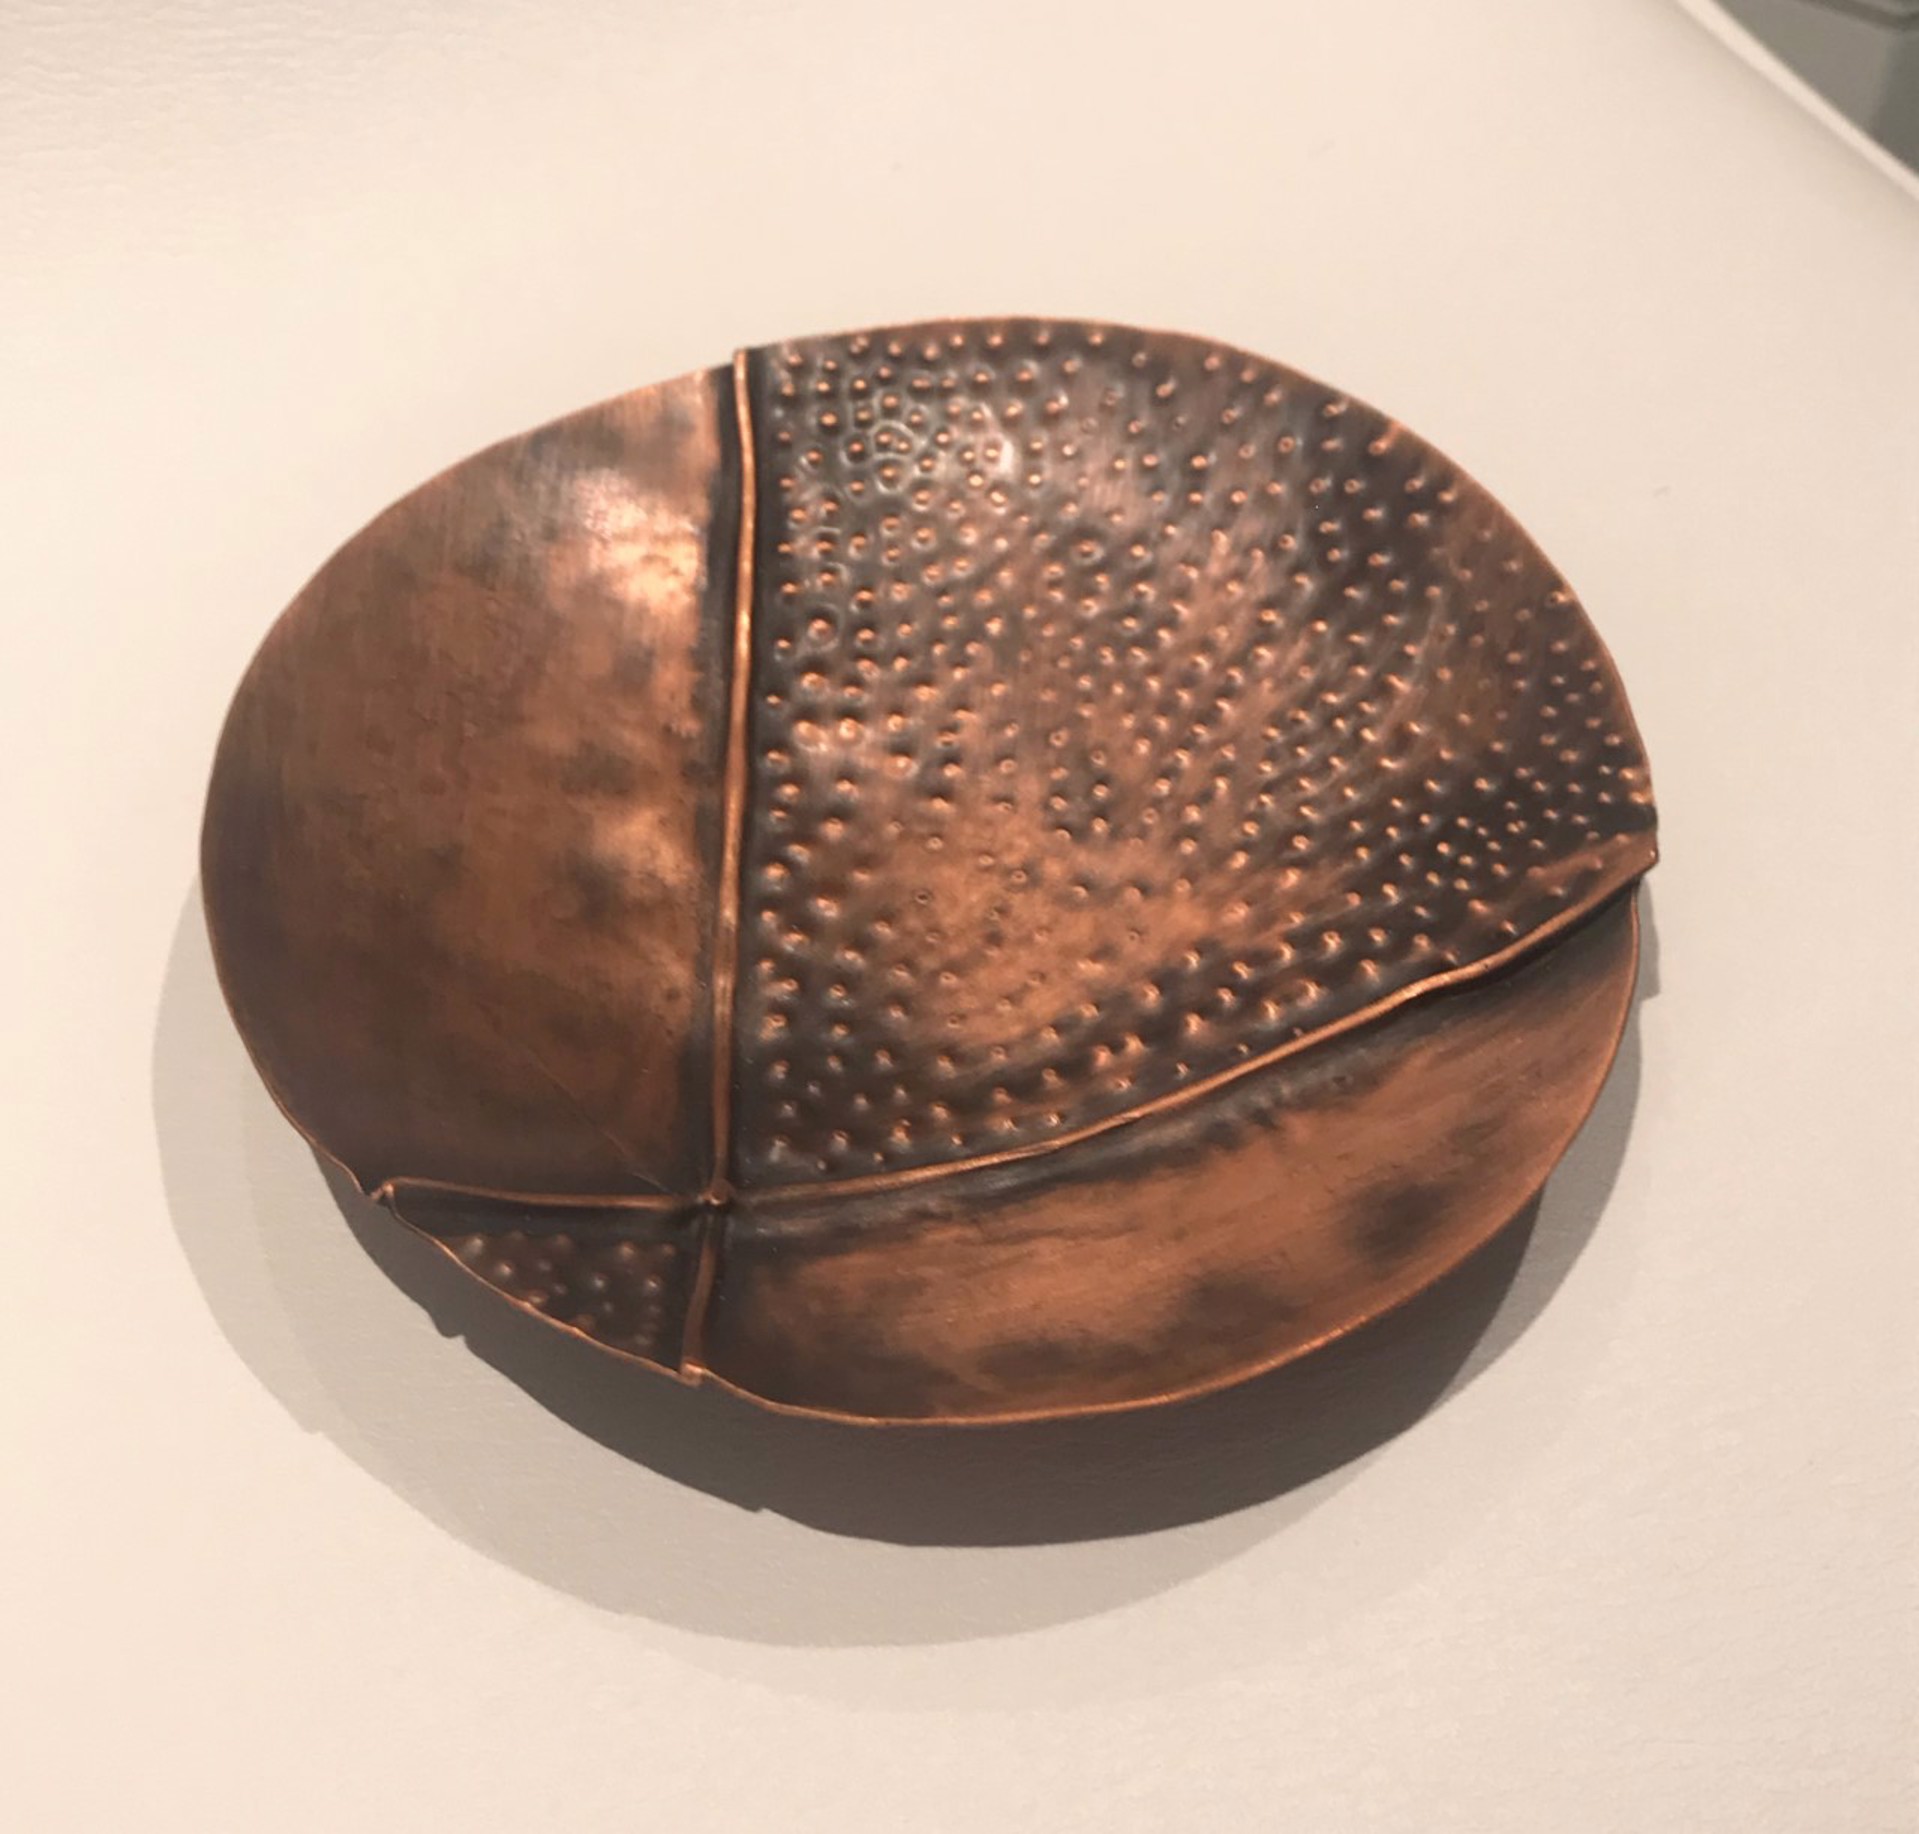 "Copper Bowl with Folds & Pebble Texture" by Nicole Josette